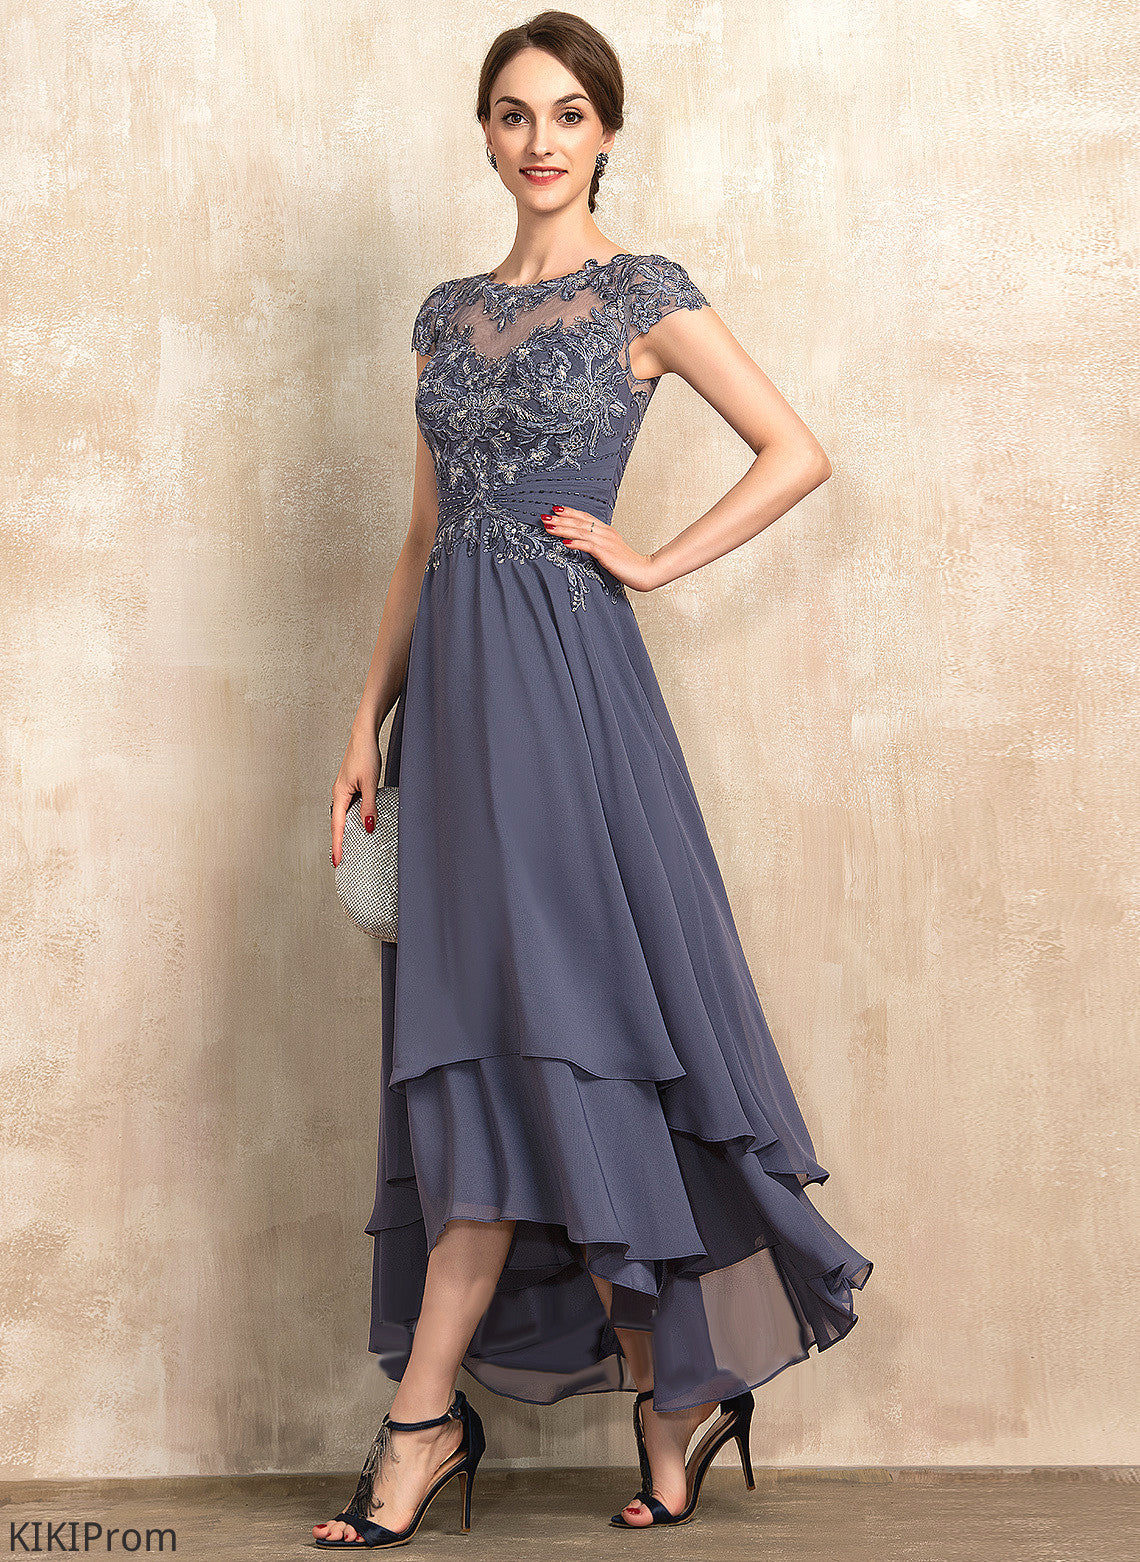 Asymmetrical Cocktail Cocktail Dresses Beading Neck Aurora Lace A-Line Scoop Chiffon Dress With